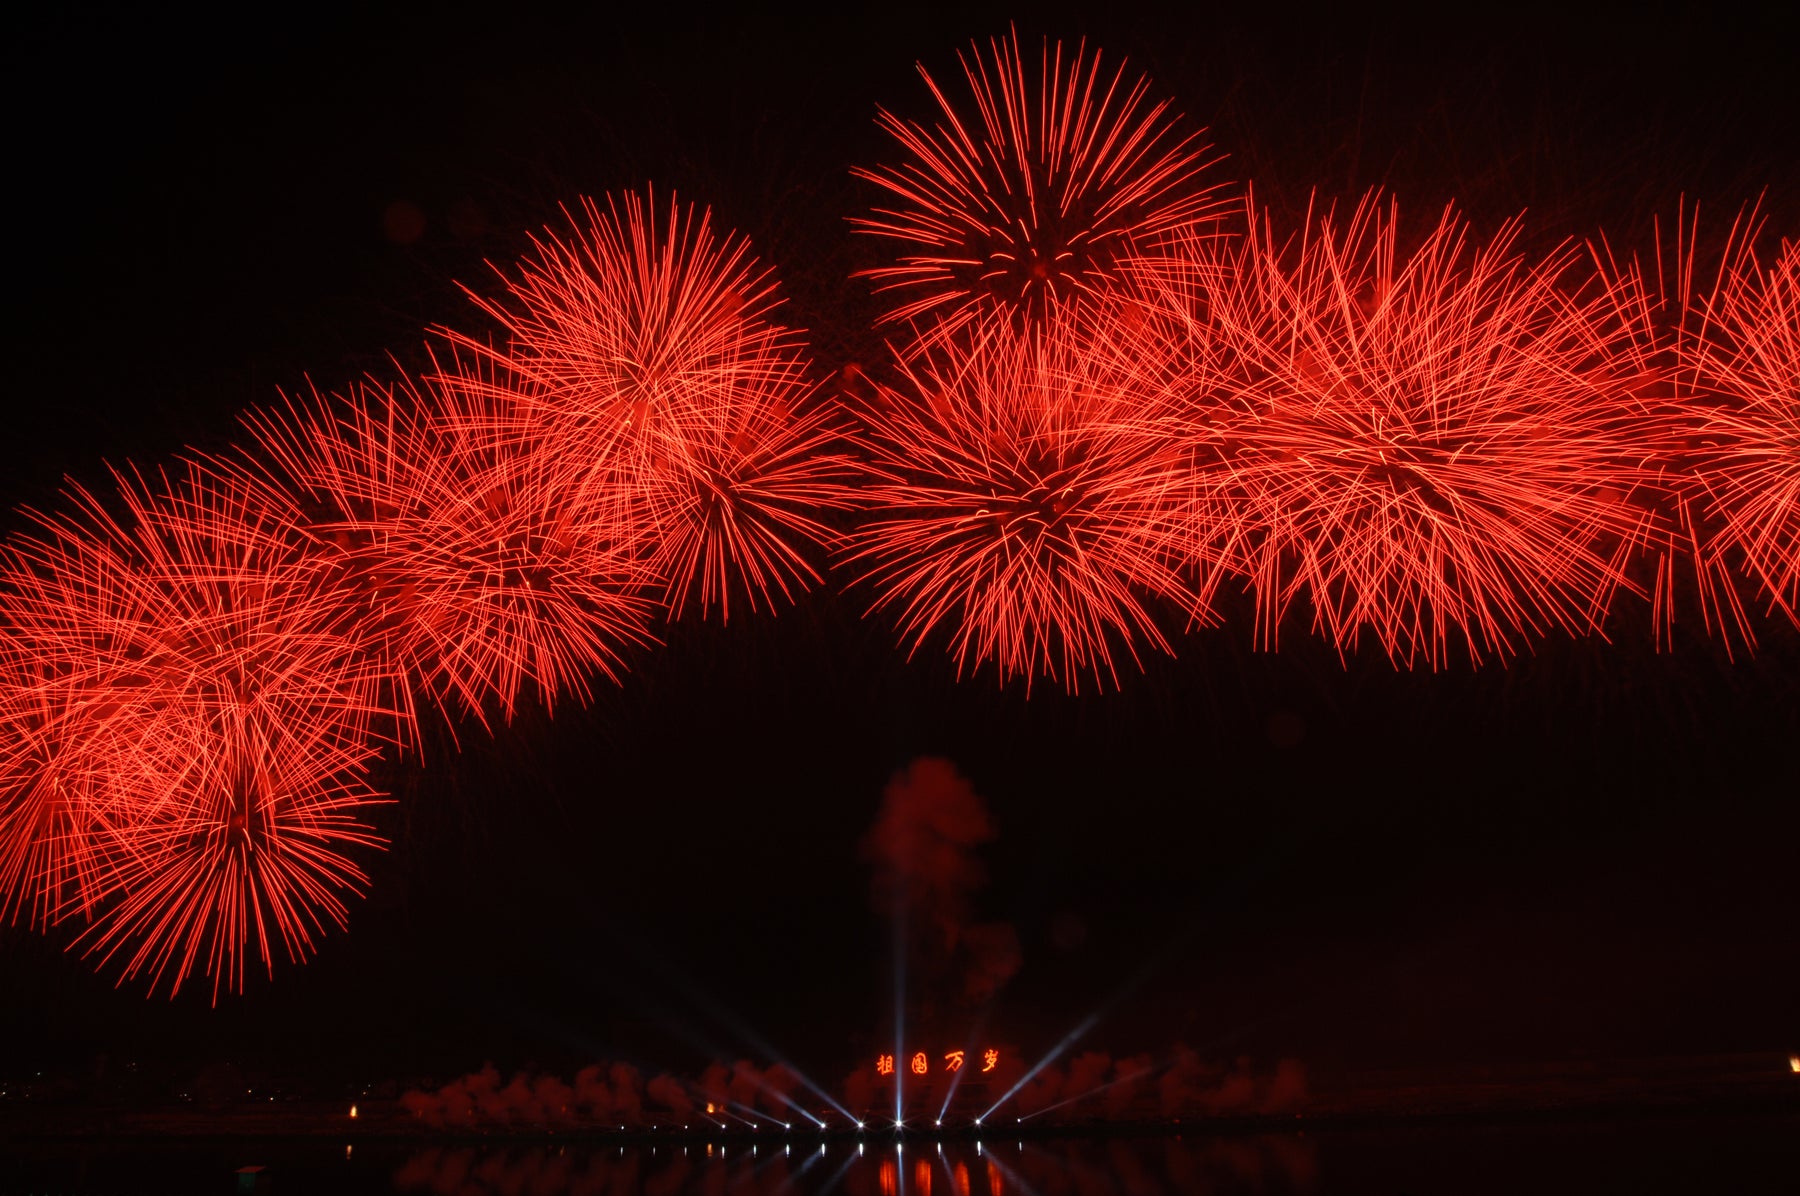 Fireworks Competition Comes To Yorkshire